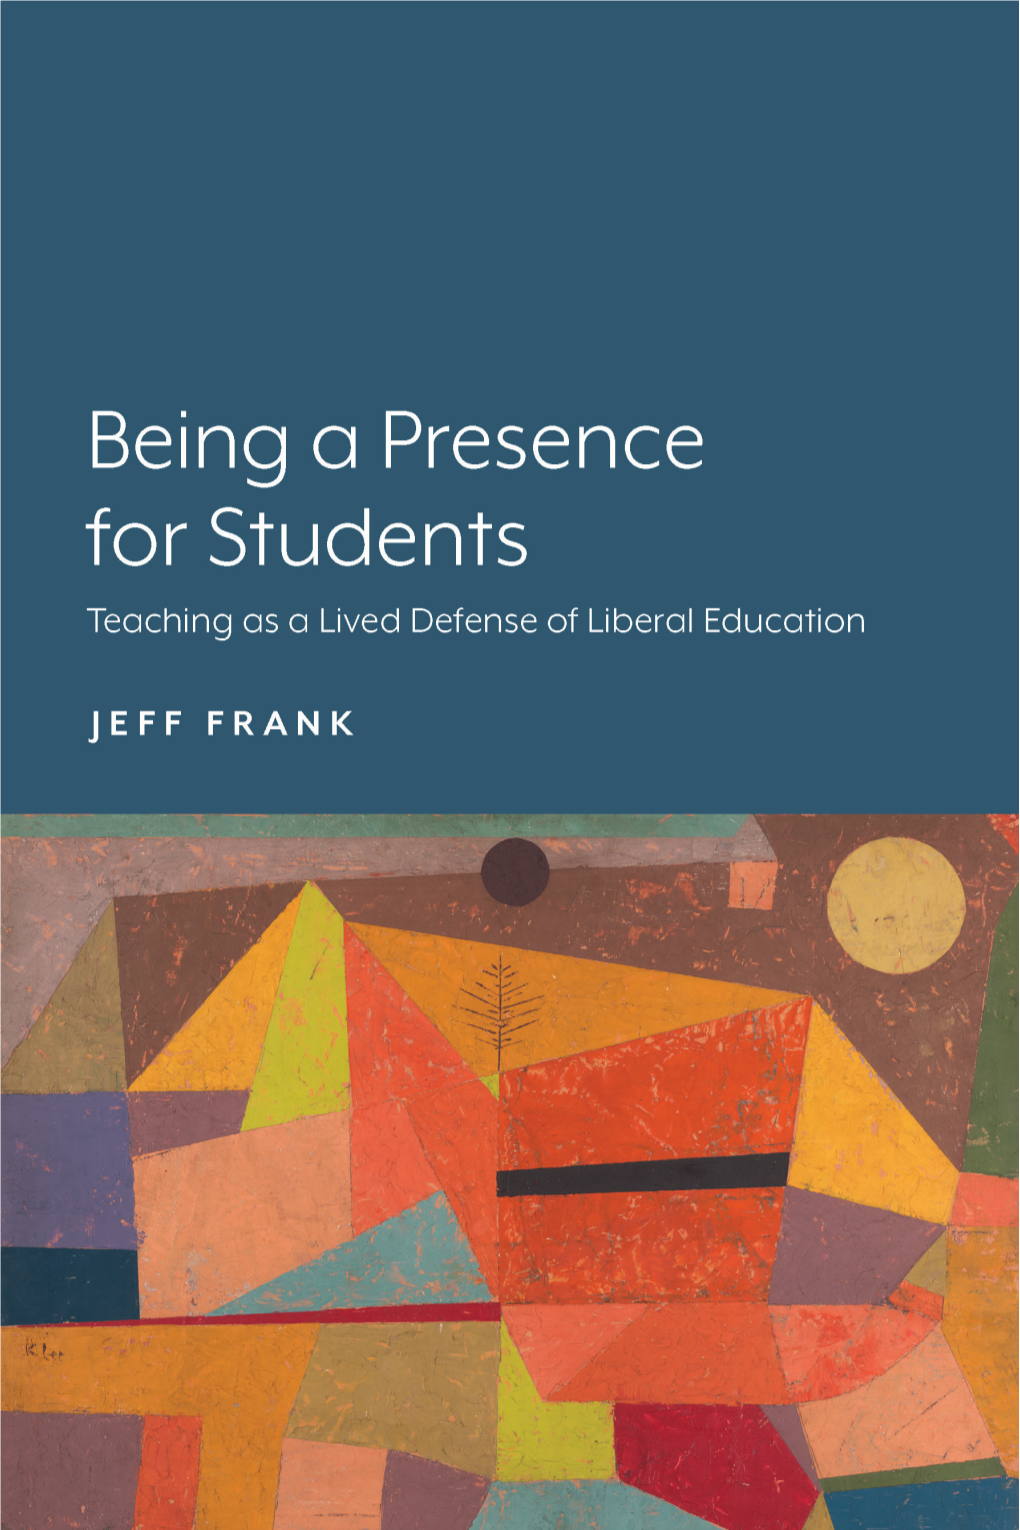 Teaching As a Lived Defense of Liberal Education